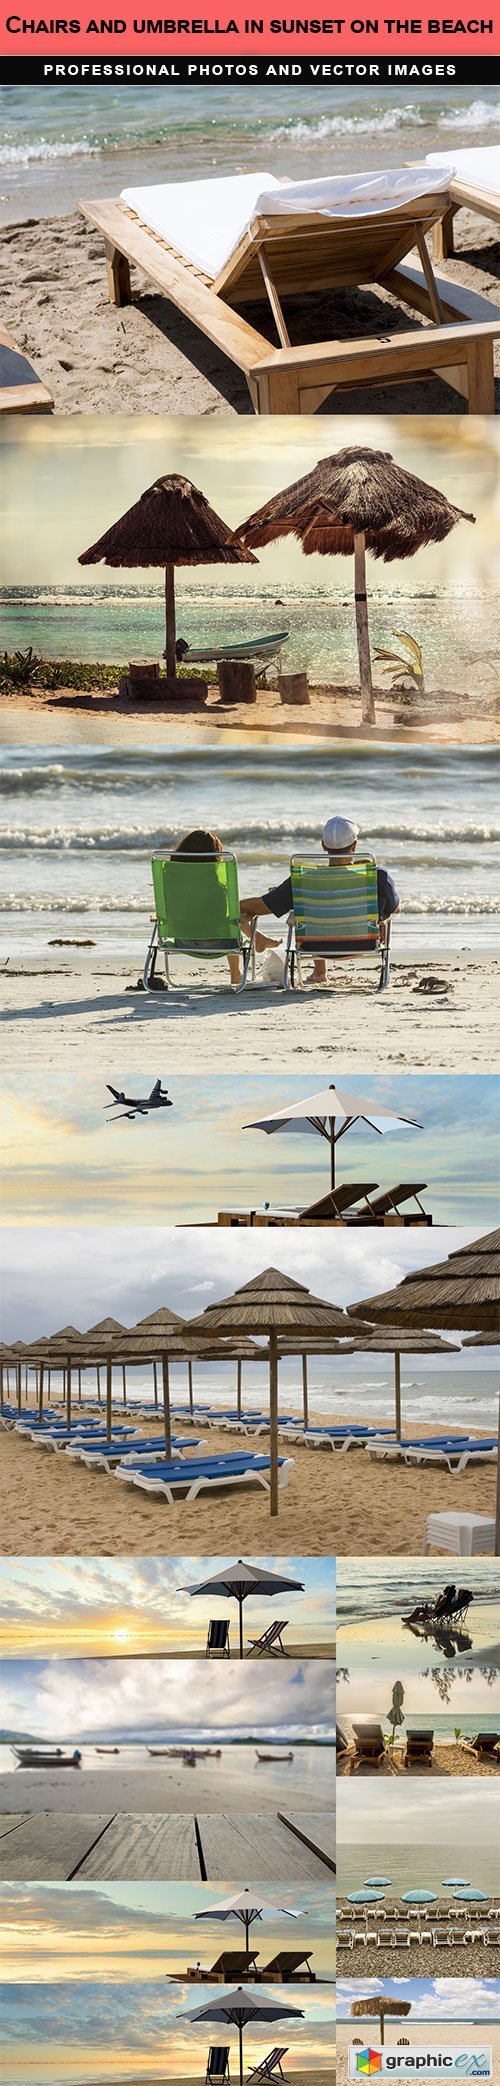 Chairs and umbrella in sunset on the beach